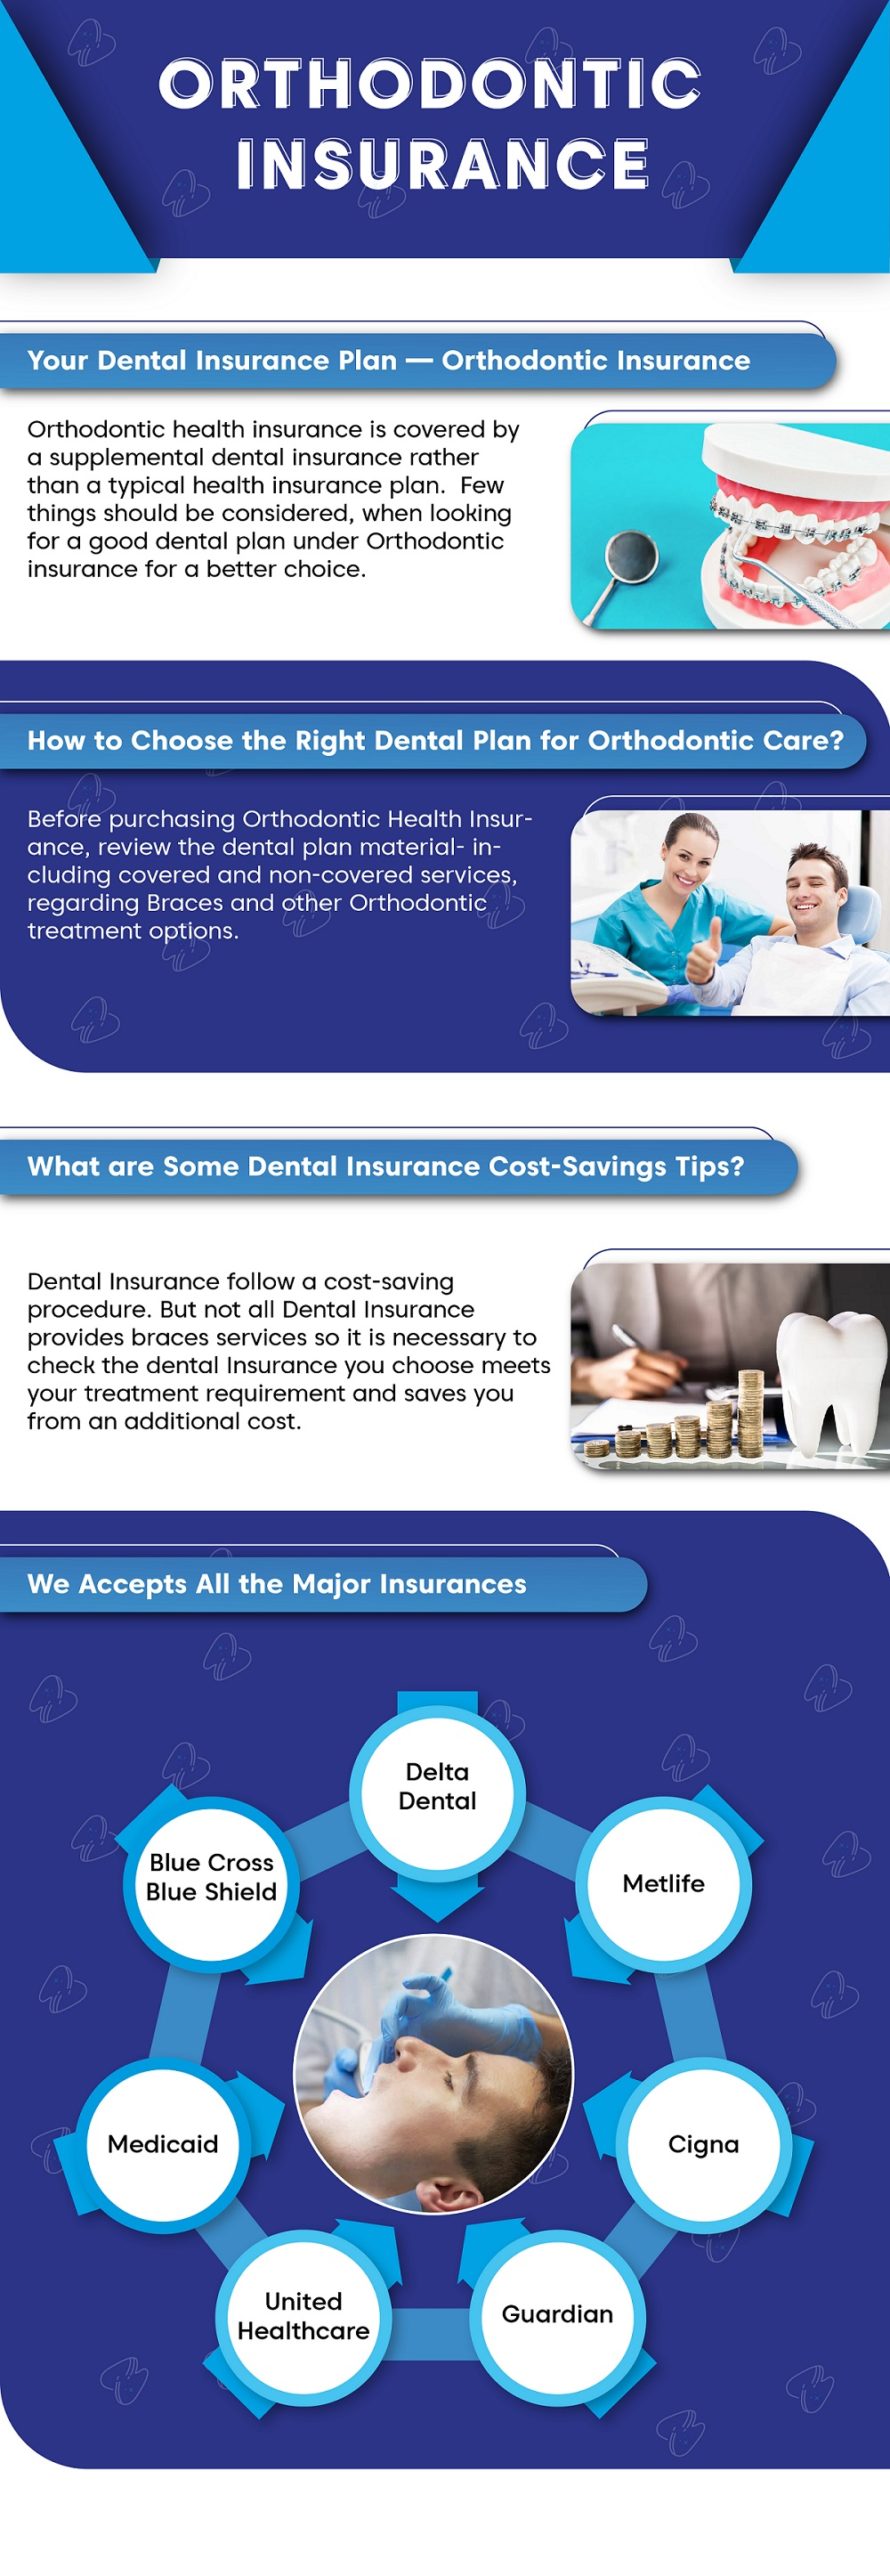 Is orthodontic treatment covered by dental insurance for seniors?